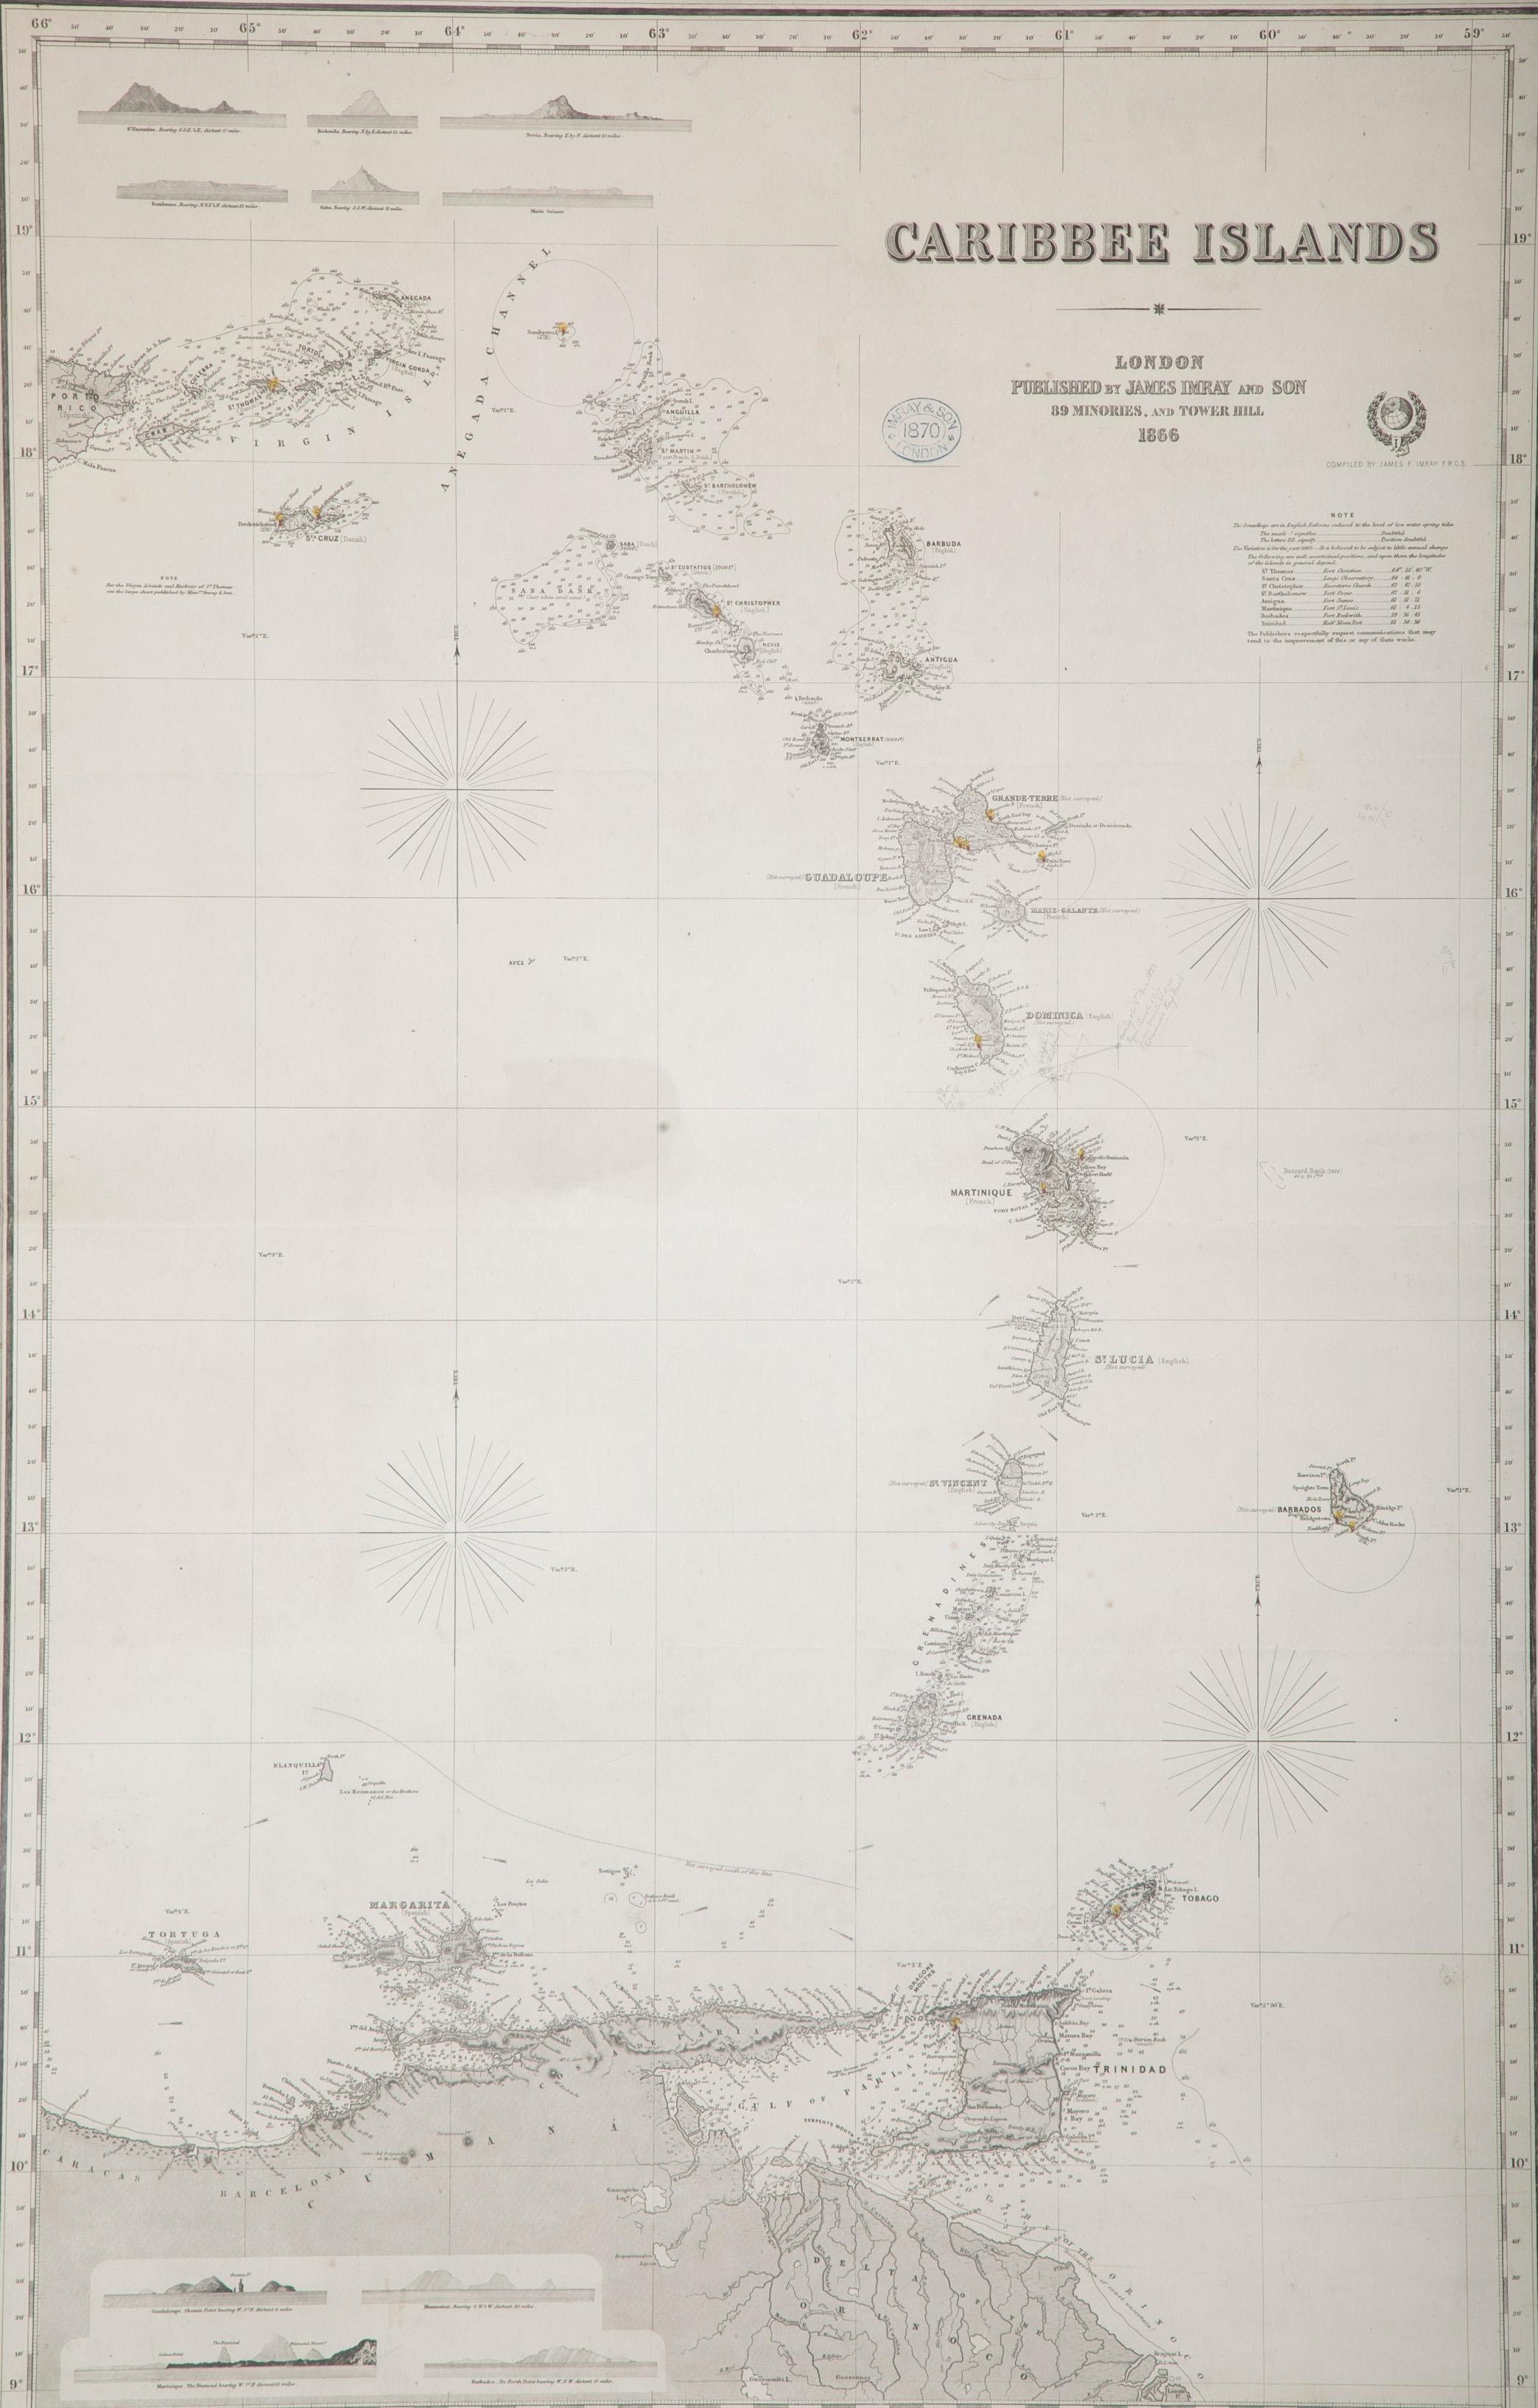 English Rare Chart of the Caribbean Islands Published by James Imray & Son, London, 1866